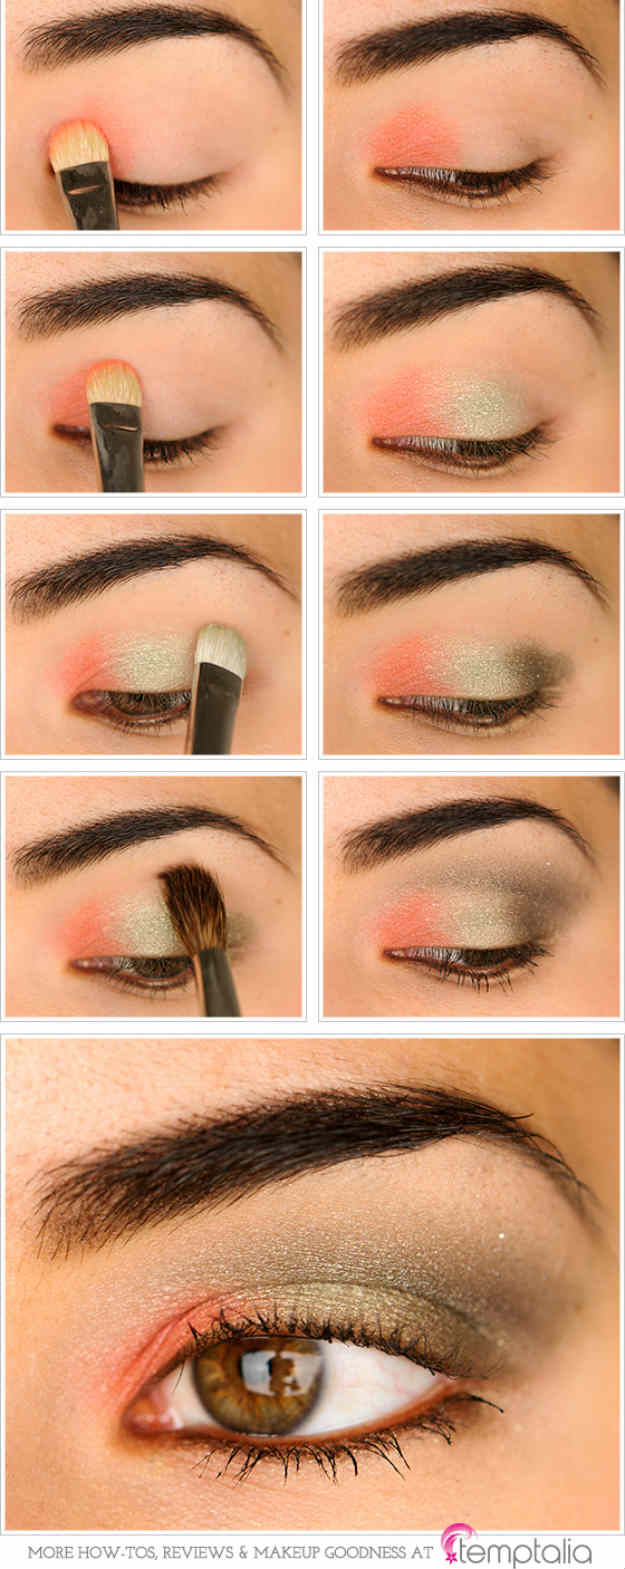 How To Do Makeup For Brown Eyes Eye Shadow For Brown Eyes Makeup Tutorials Guide Estheticnet